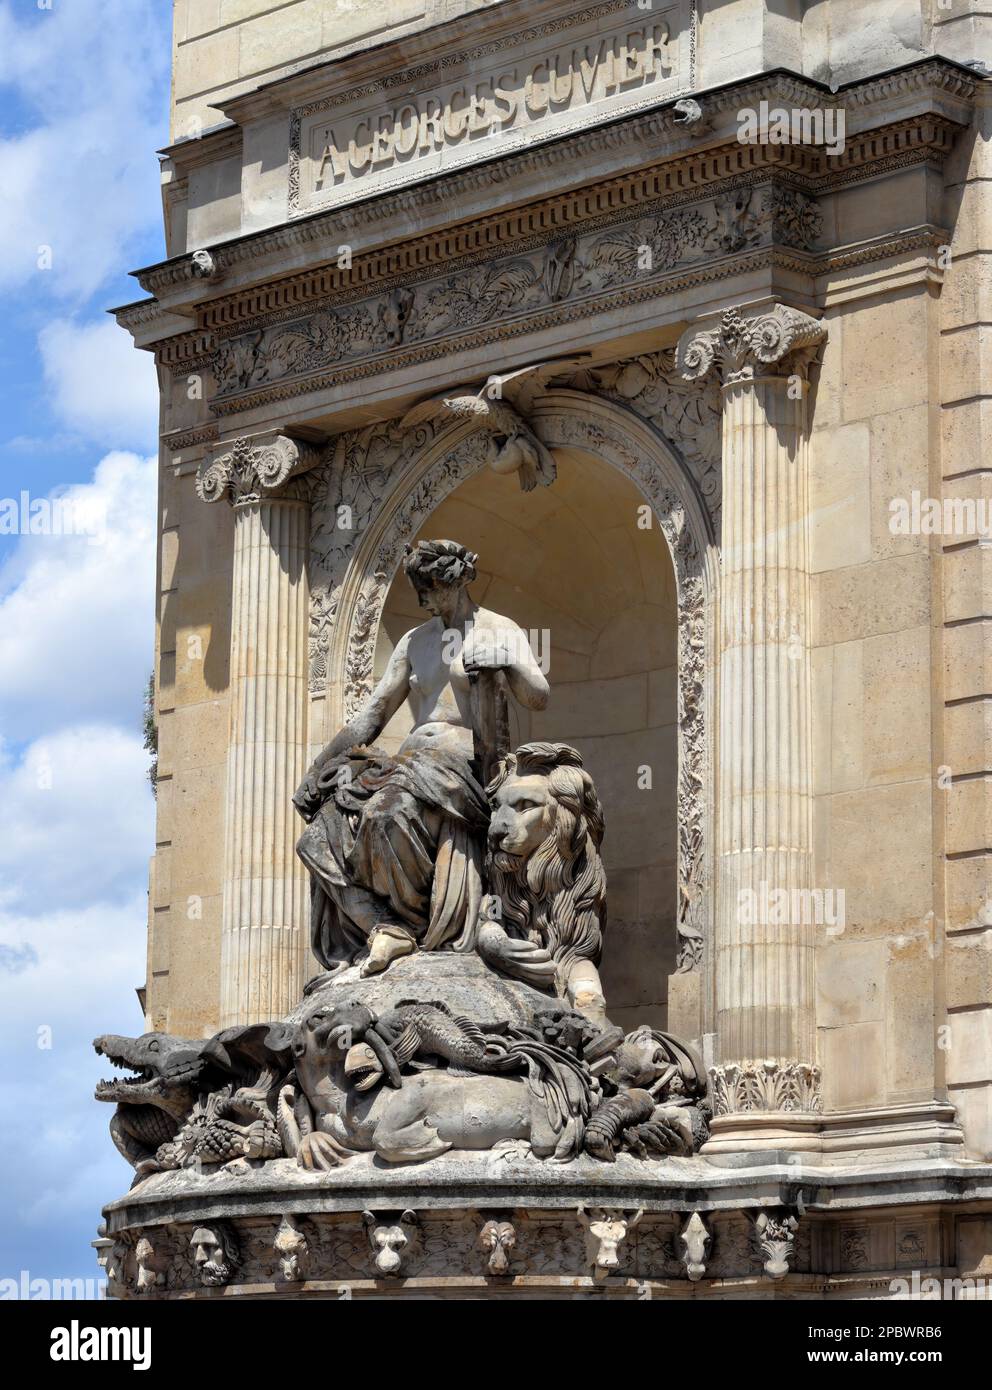 The Georges Cuvier Fountain in Paris, France. A tribute to the eminent French naturalist, by the architect Alphonse Vigoureux in 1840. Stock Photo